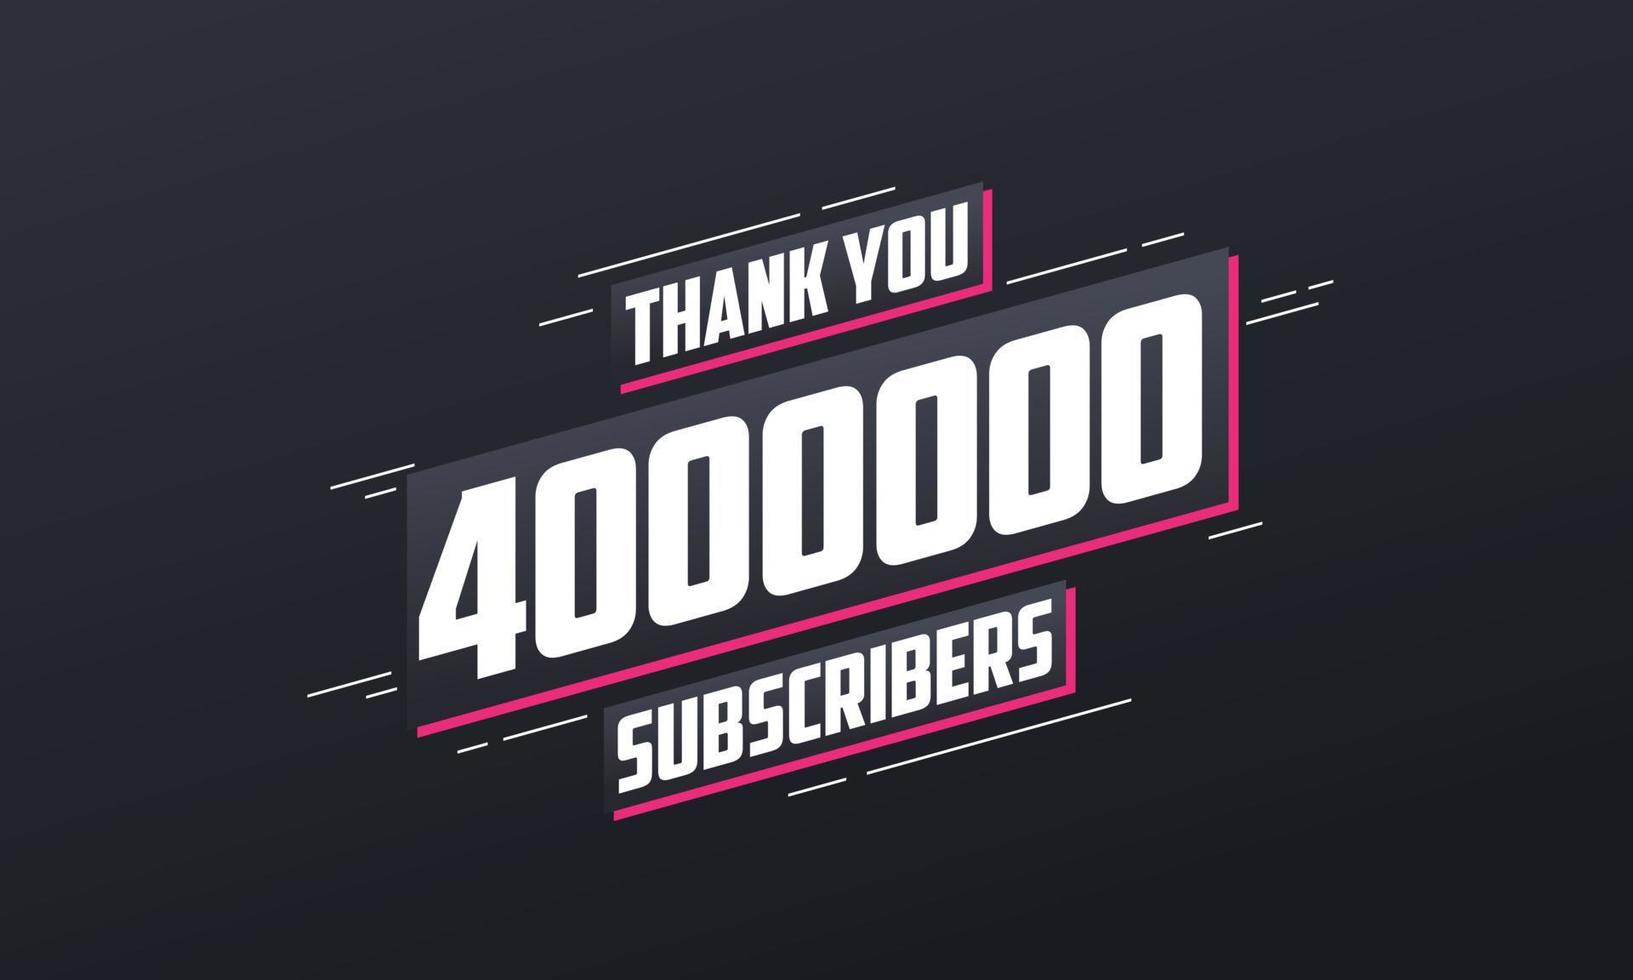 Thank you 4000000 subscribers 4m subscribers celebration. vector